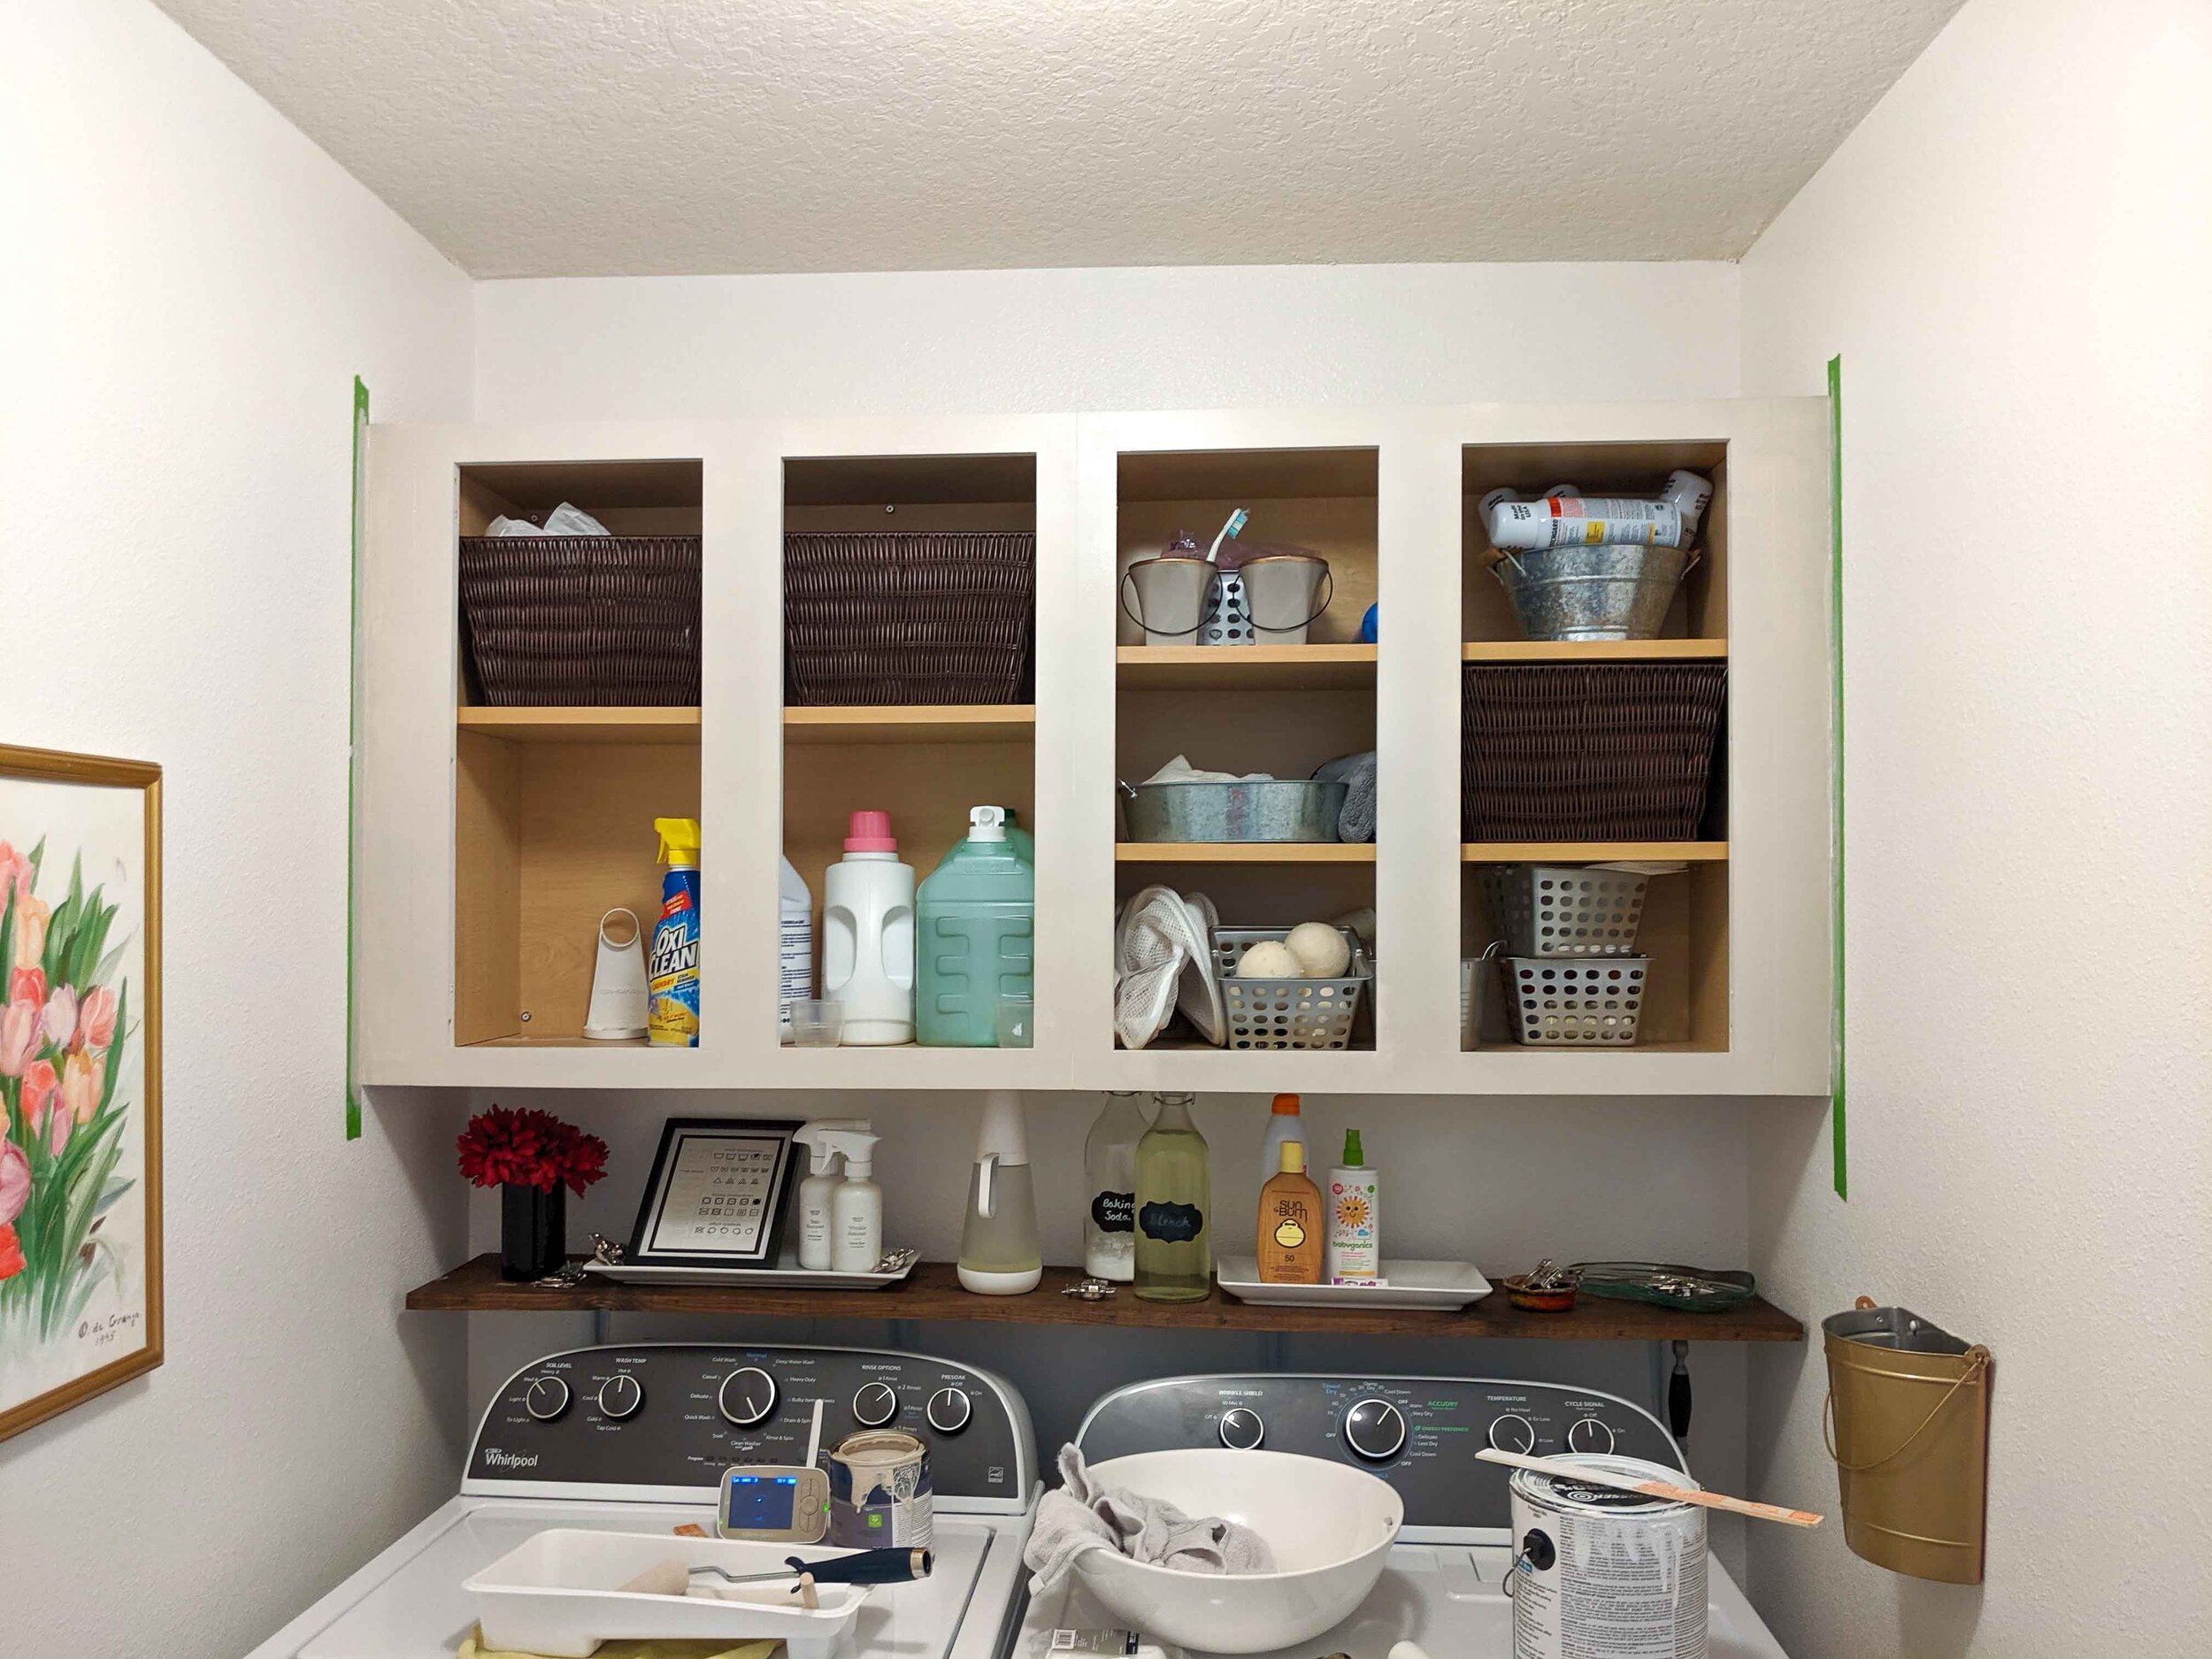 Laundry Room Reveal Part 2: Organizing A Deep Laundry Cabinet! - Smallish  Home